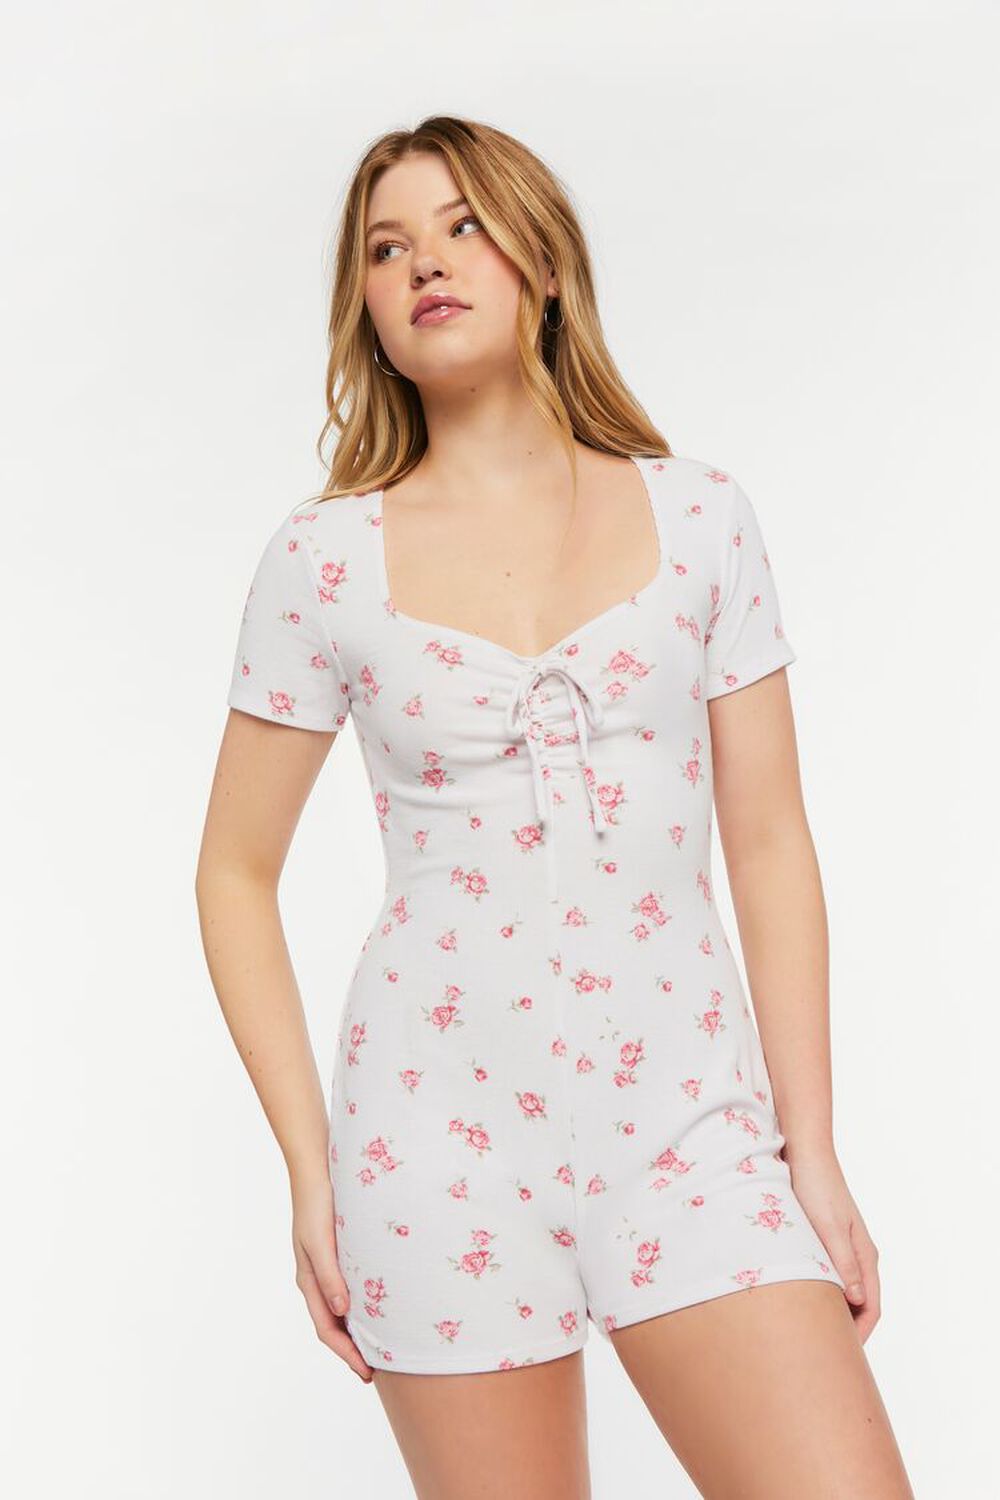 WHITE/PINK Rose Print Ruched Lounge Romper, image 2